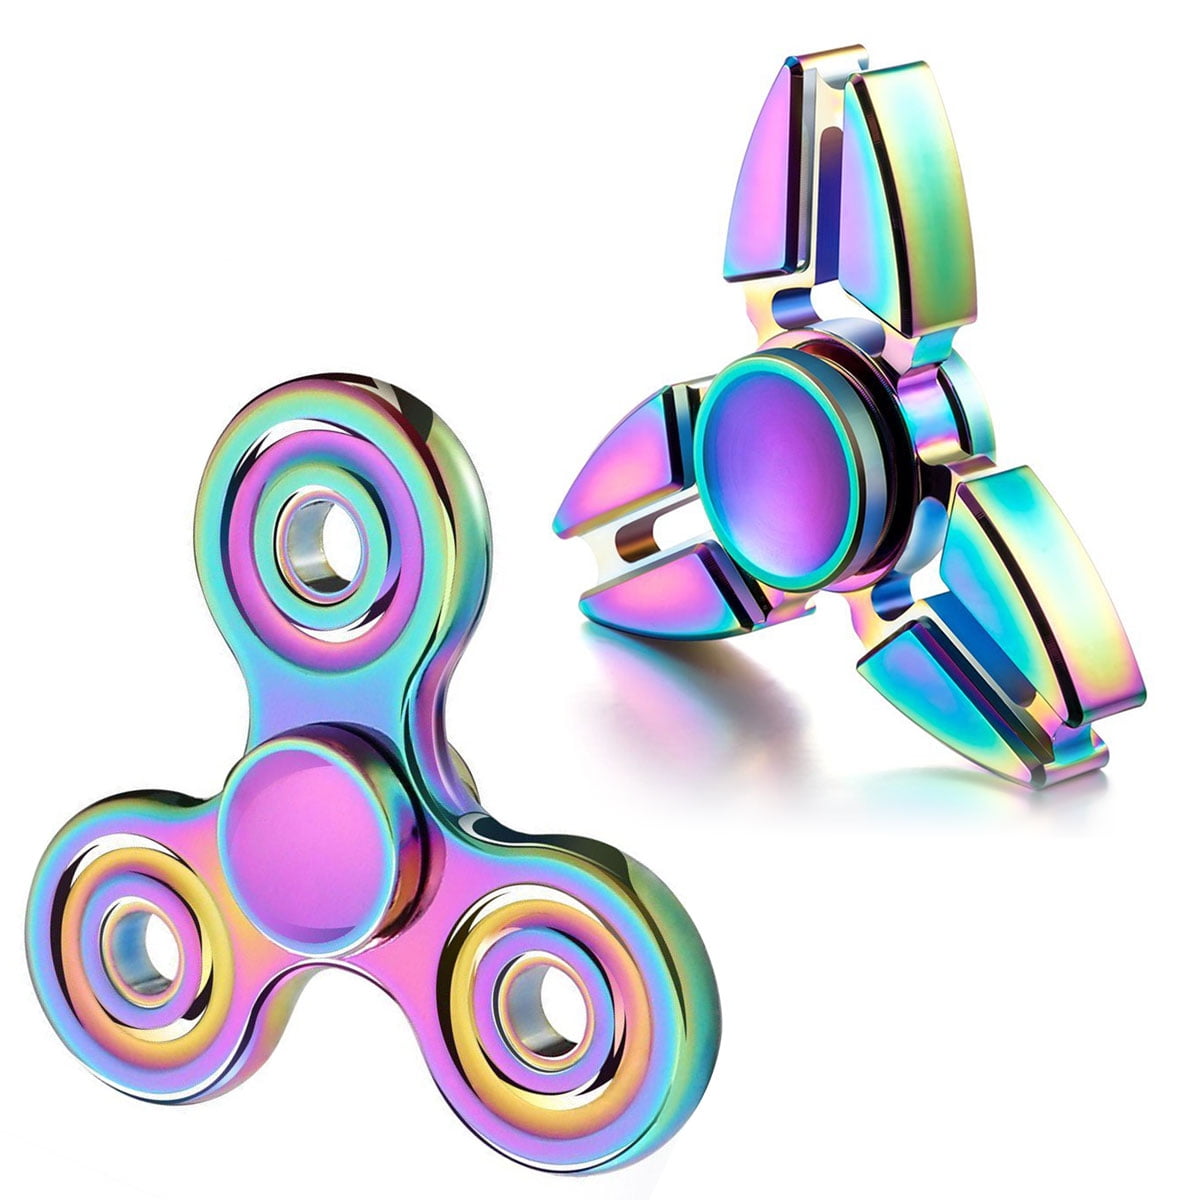 LED Light Up Rainbow Toy Stress Relief ADHD Anxiety Reducer Spin Play Toy for Adults Nuanchu Fidget Hand Spinners 6 Boys and Girls Clear Fidget Boredom Killing Time Toys 